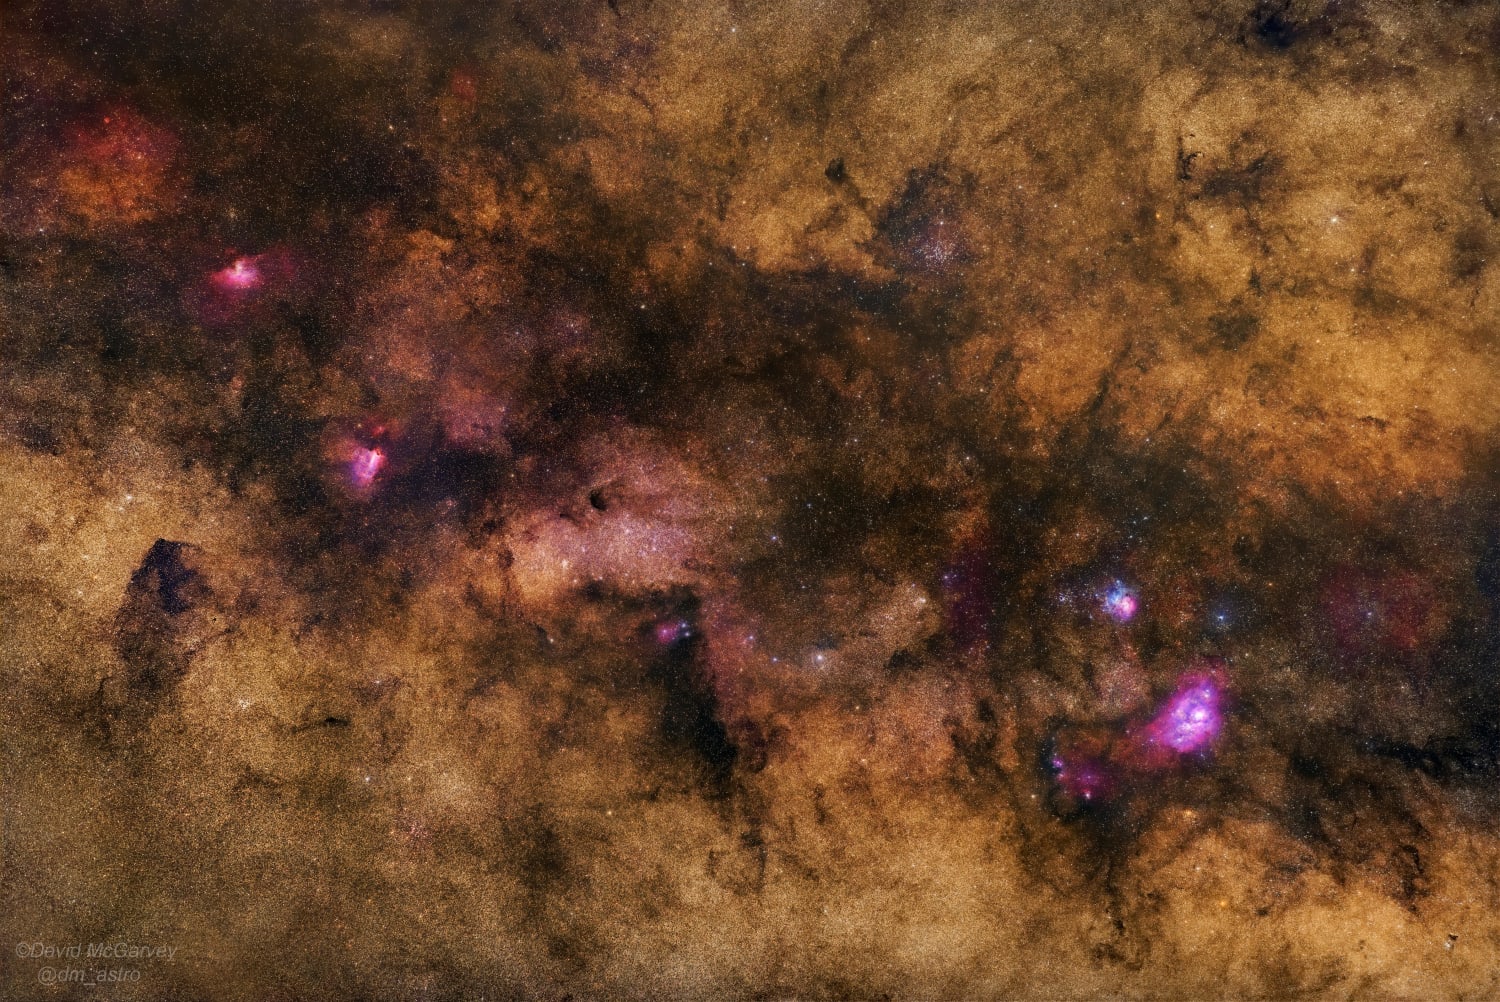 A Long Exposure Milky Way image stretching from the Lagoon Nebula to the Eagle Nebula